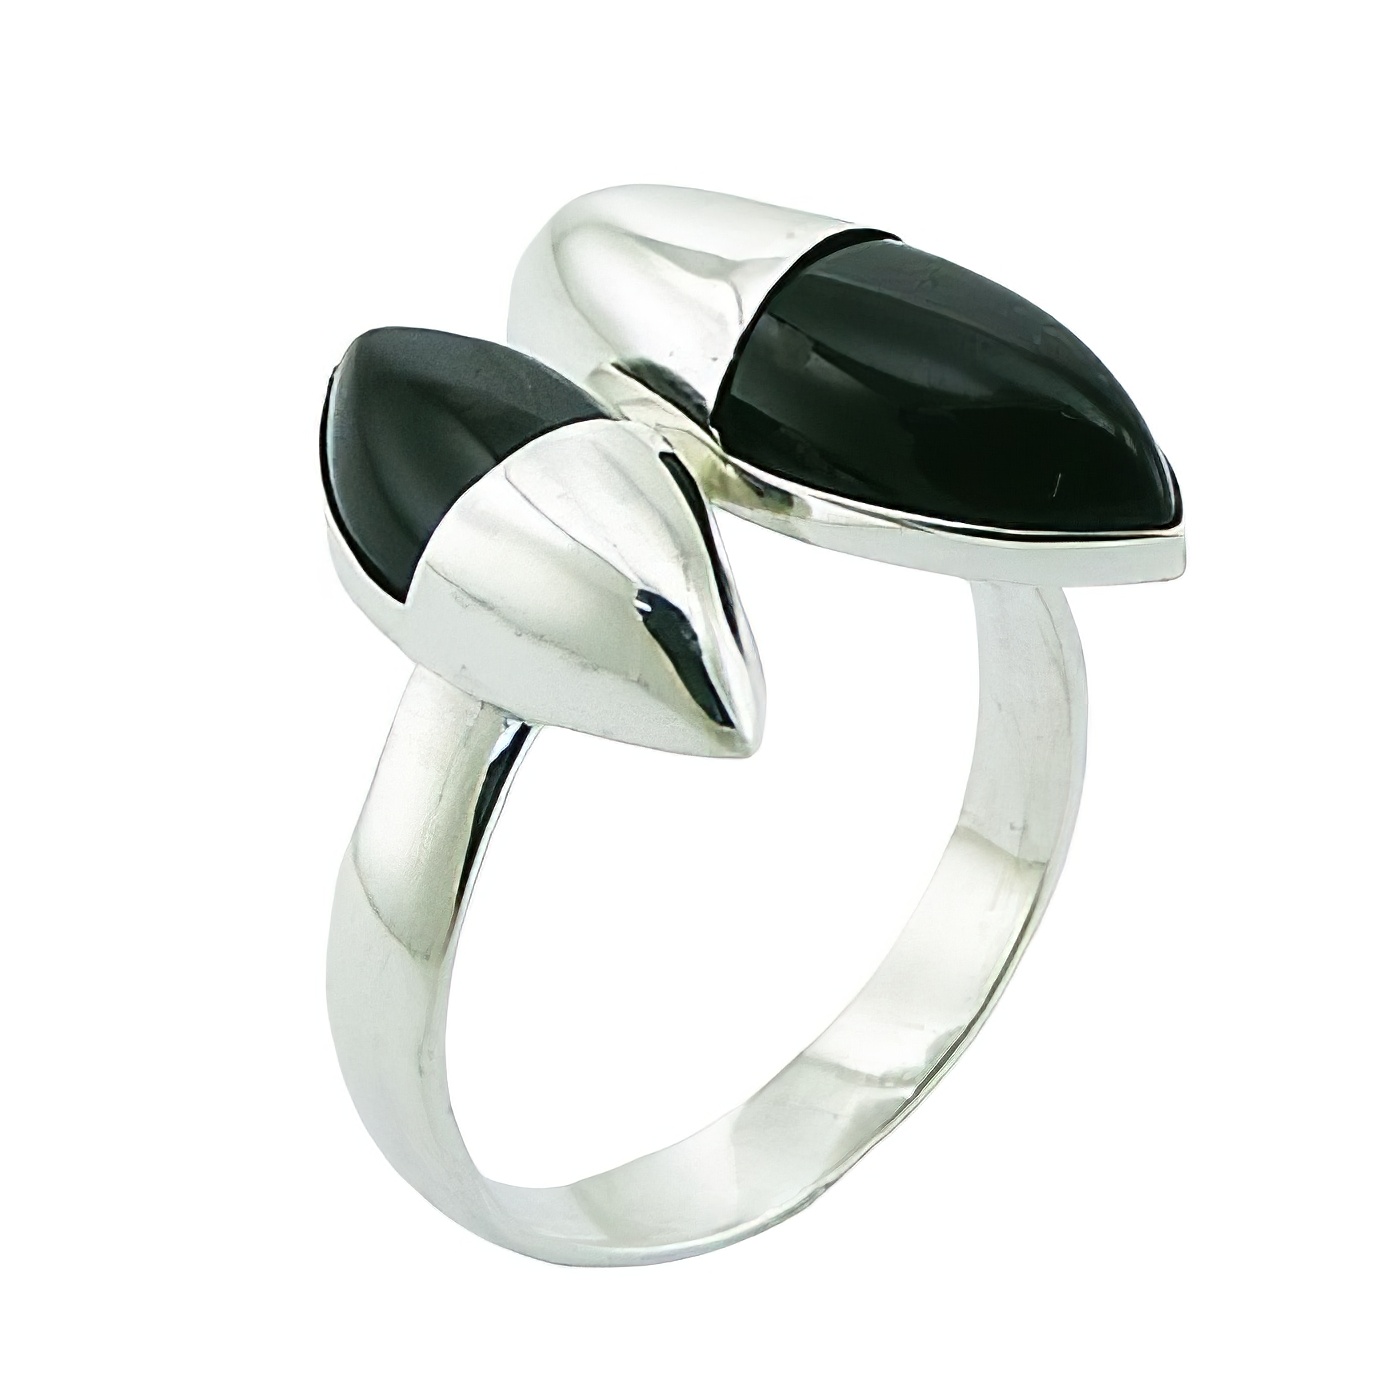 Convexed Marquise Shape Fancy Silver Black Agate Ring 